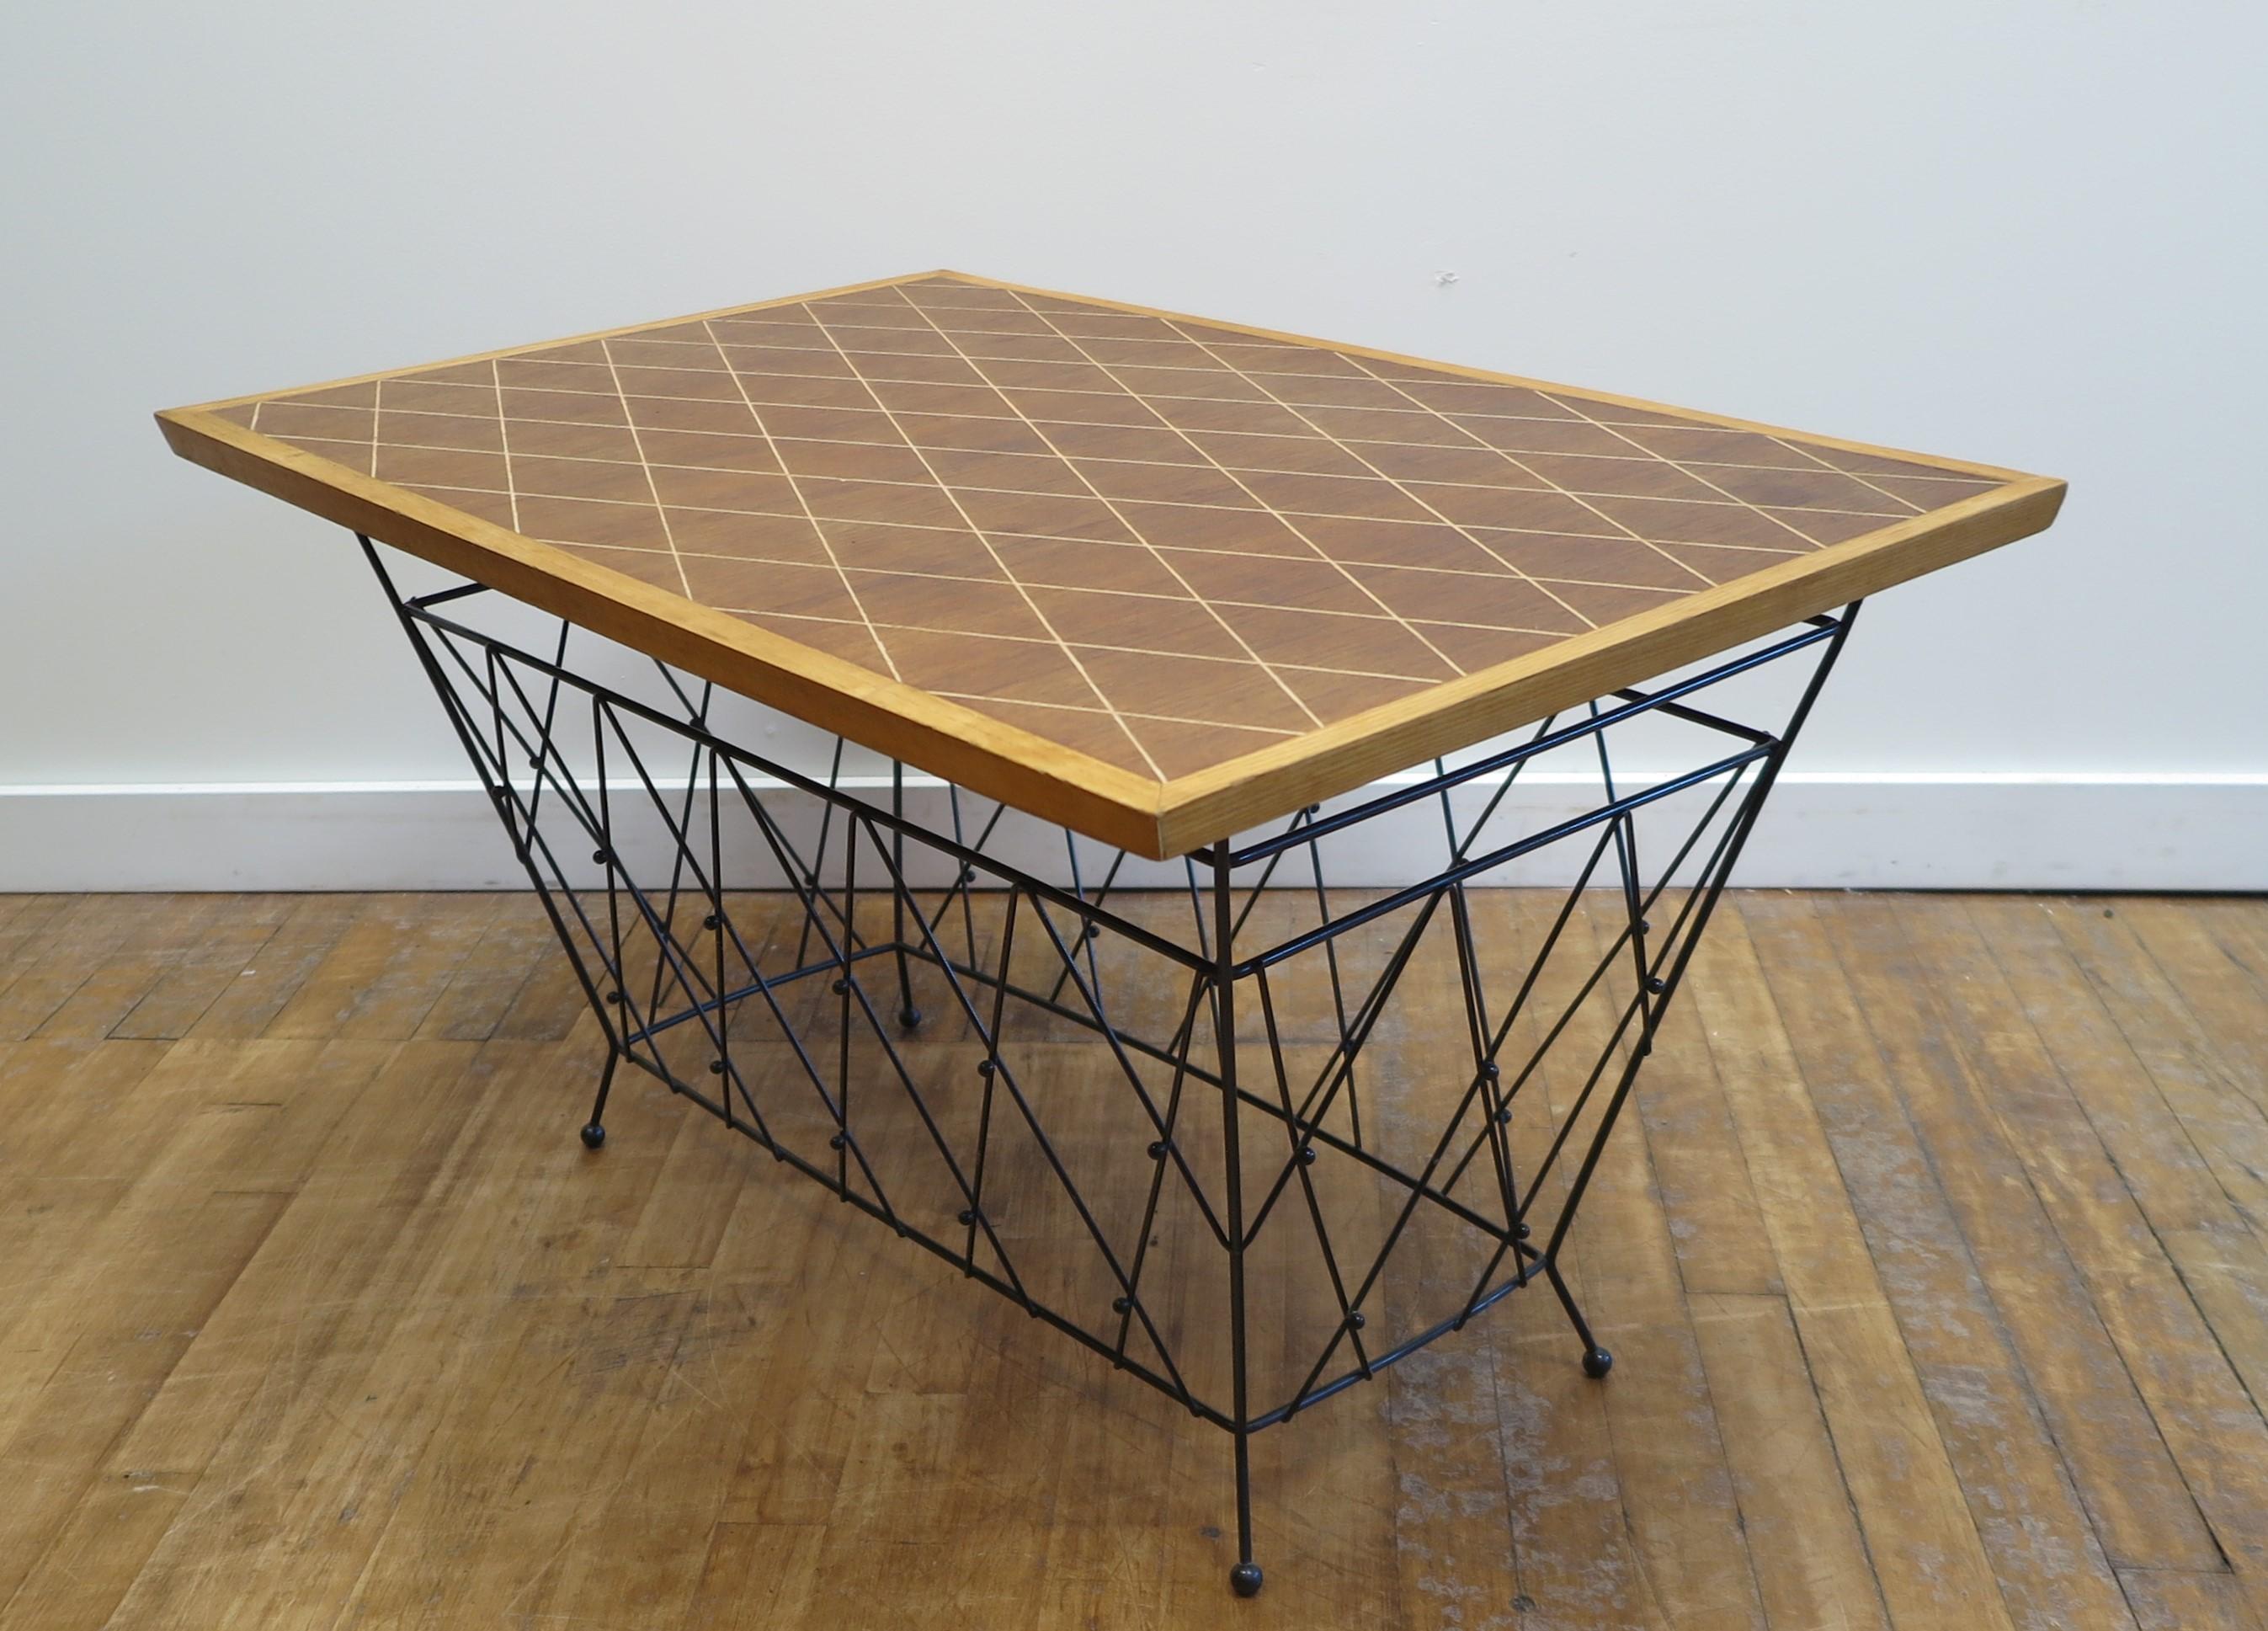 Mid Century Modern cocktail Table Side Table.  A French Marquetry inlay top set on steel metal cage X base design frame with incorporated legs.  Modern geometric inlay pattern to the wooden top.  Corresponding design to the metal base accented with